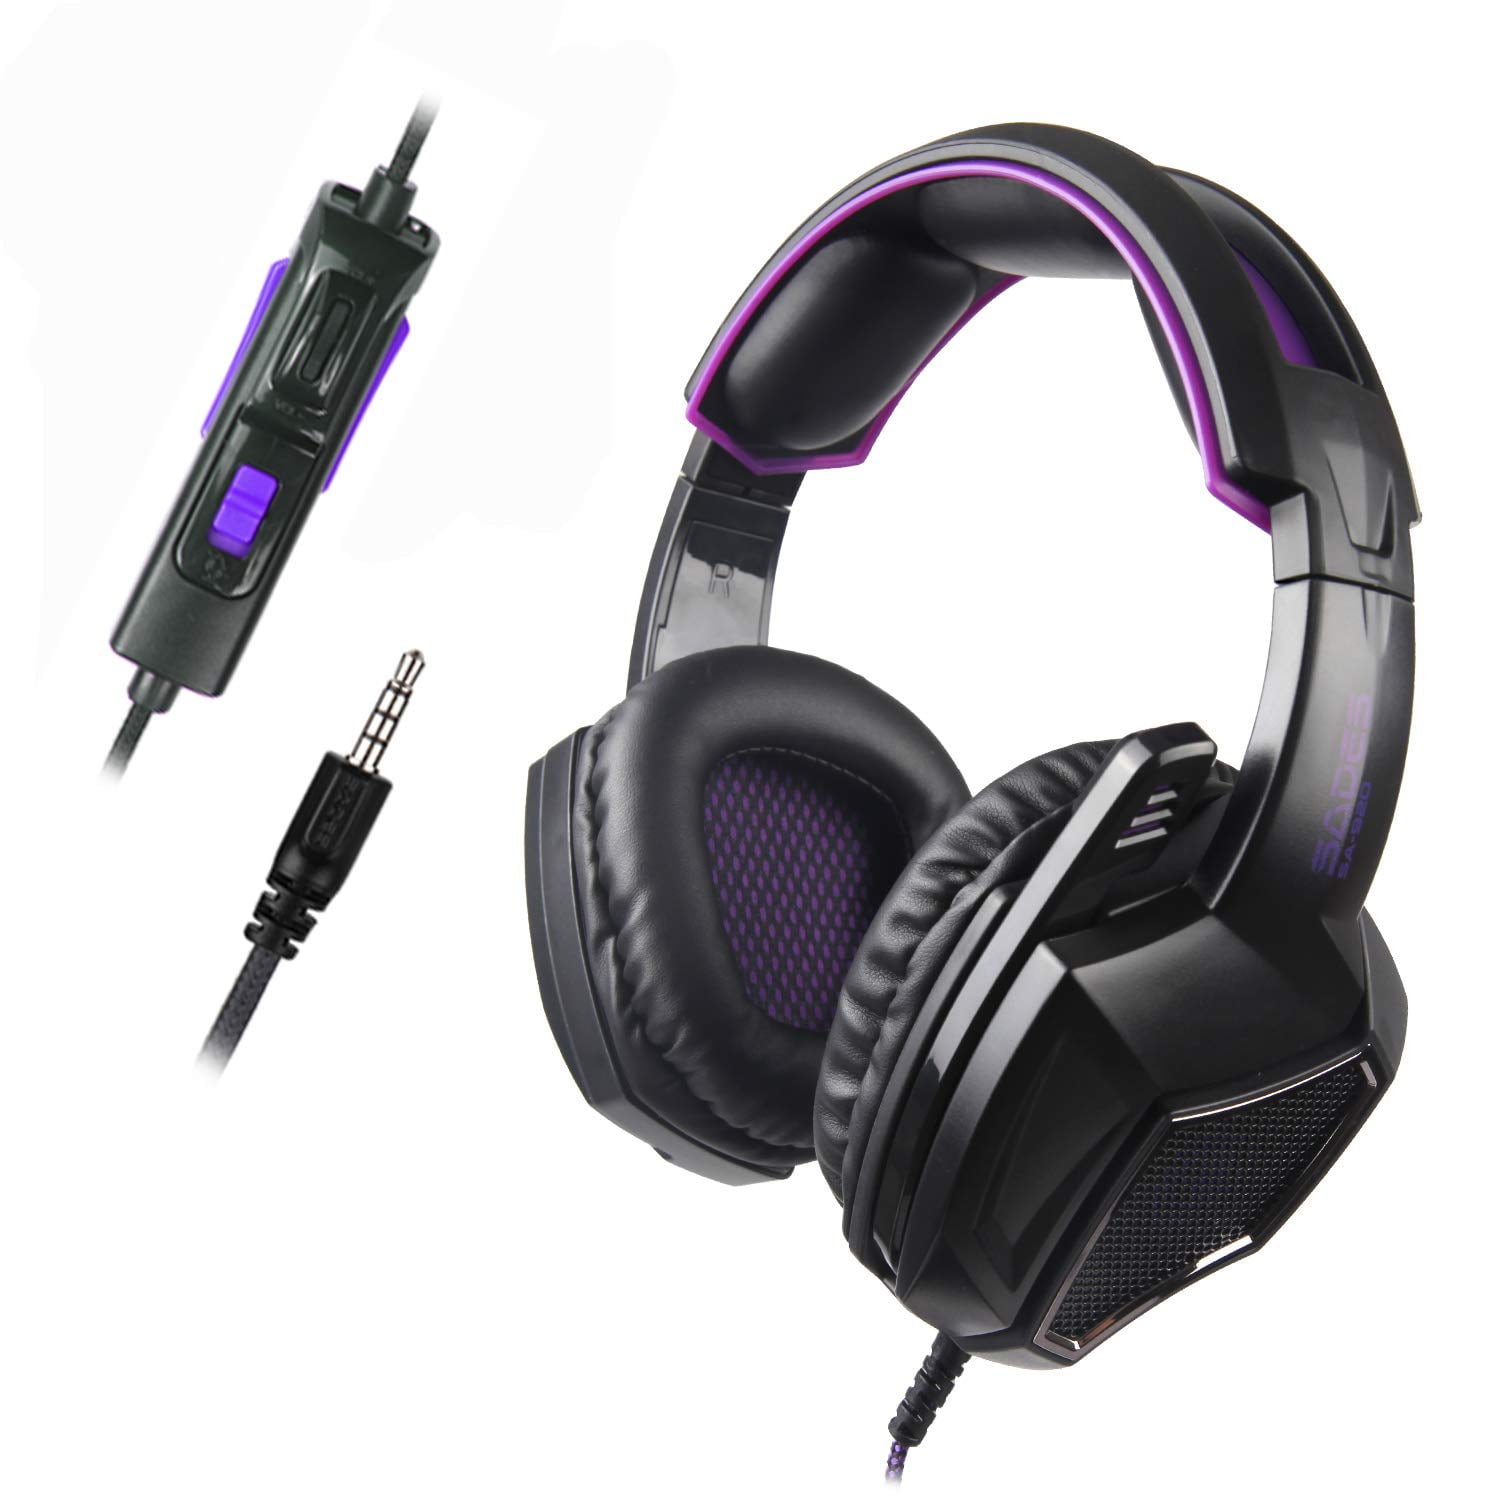 Xbox One Ps4 Gaming Headset Sades Sa 920plus Wired Stereo Noise Canceling Headphone With Volume Control Mic For New Xbox One Laptop Pc Mac Smart Phone Black Purple Walmart Com